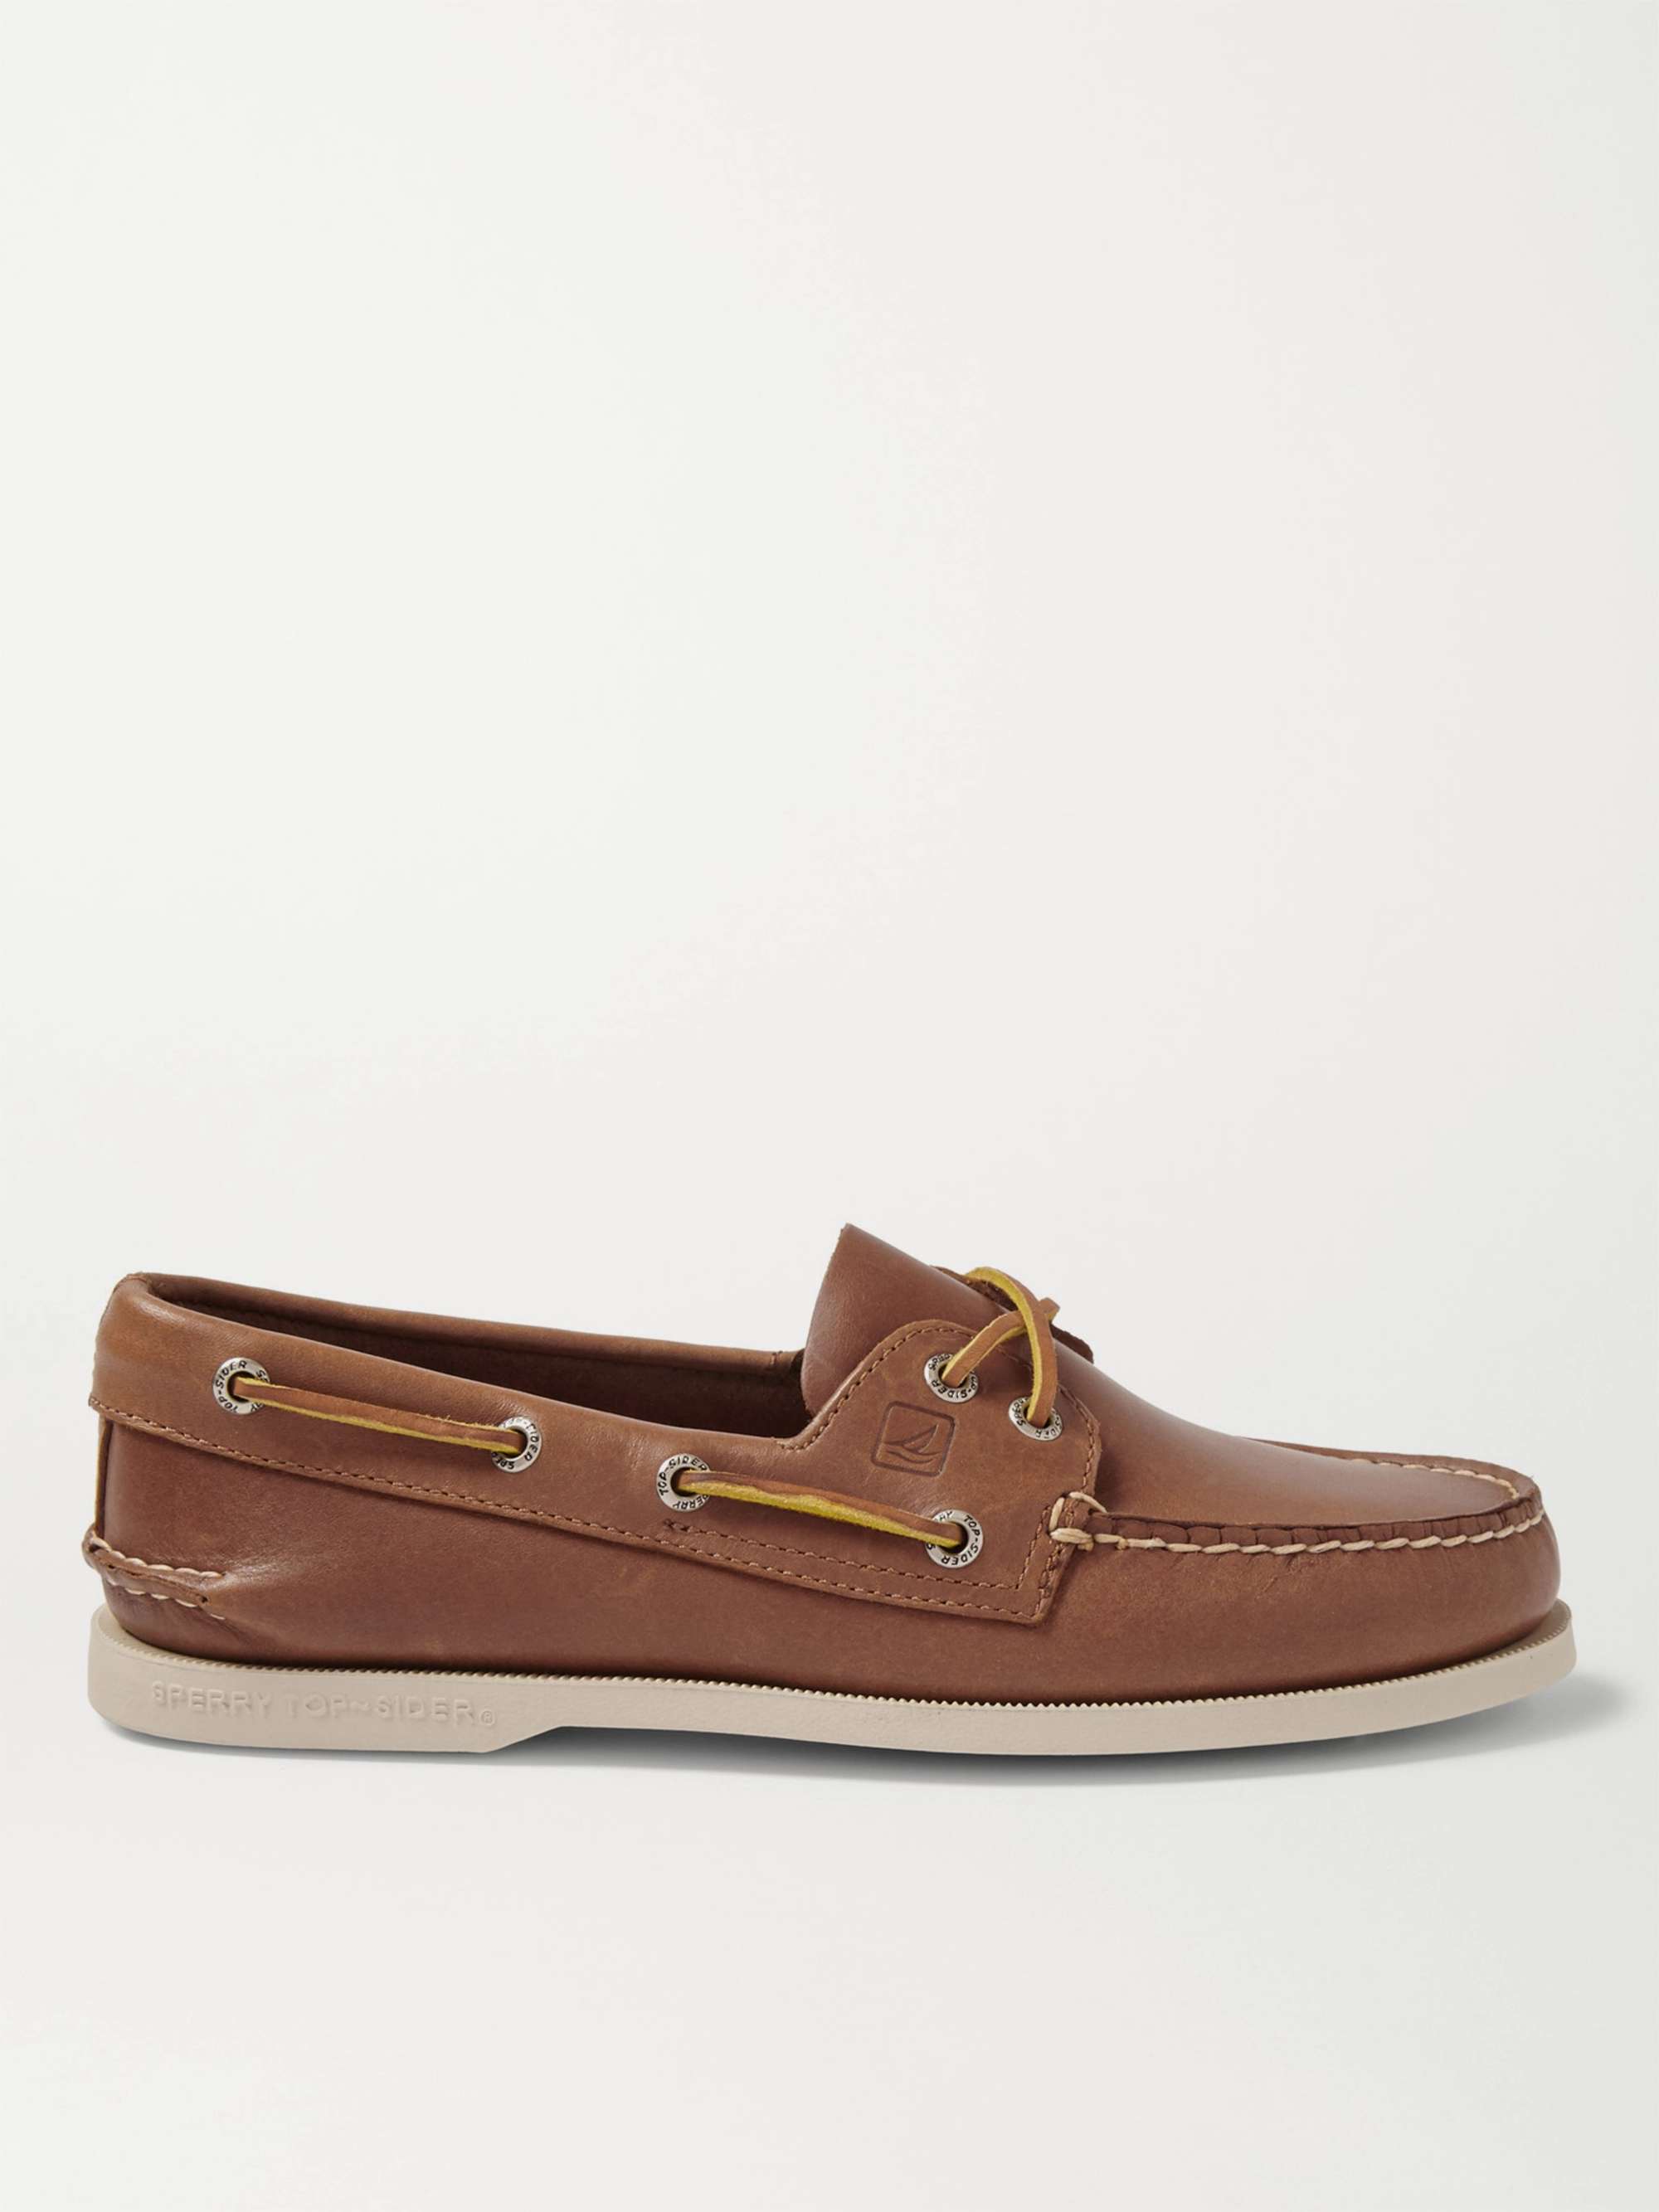 SPERRY Authentic Original Leather Boat Shoes for Men | MR PORTER